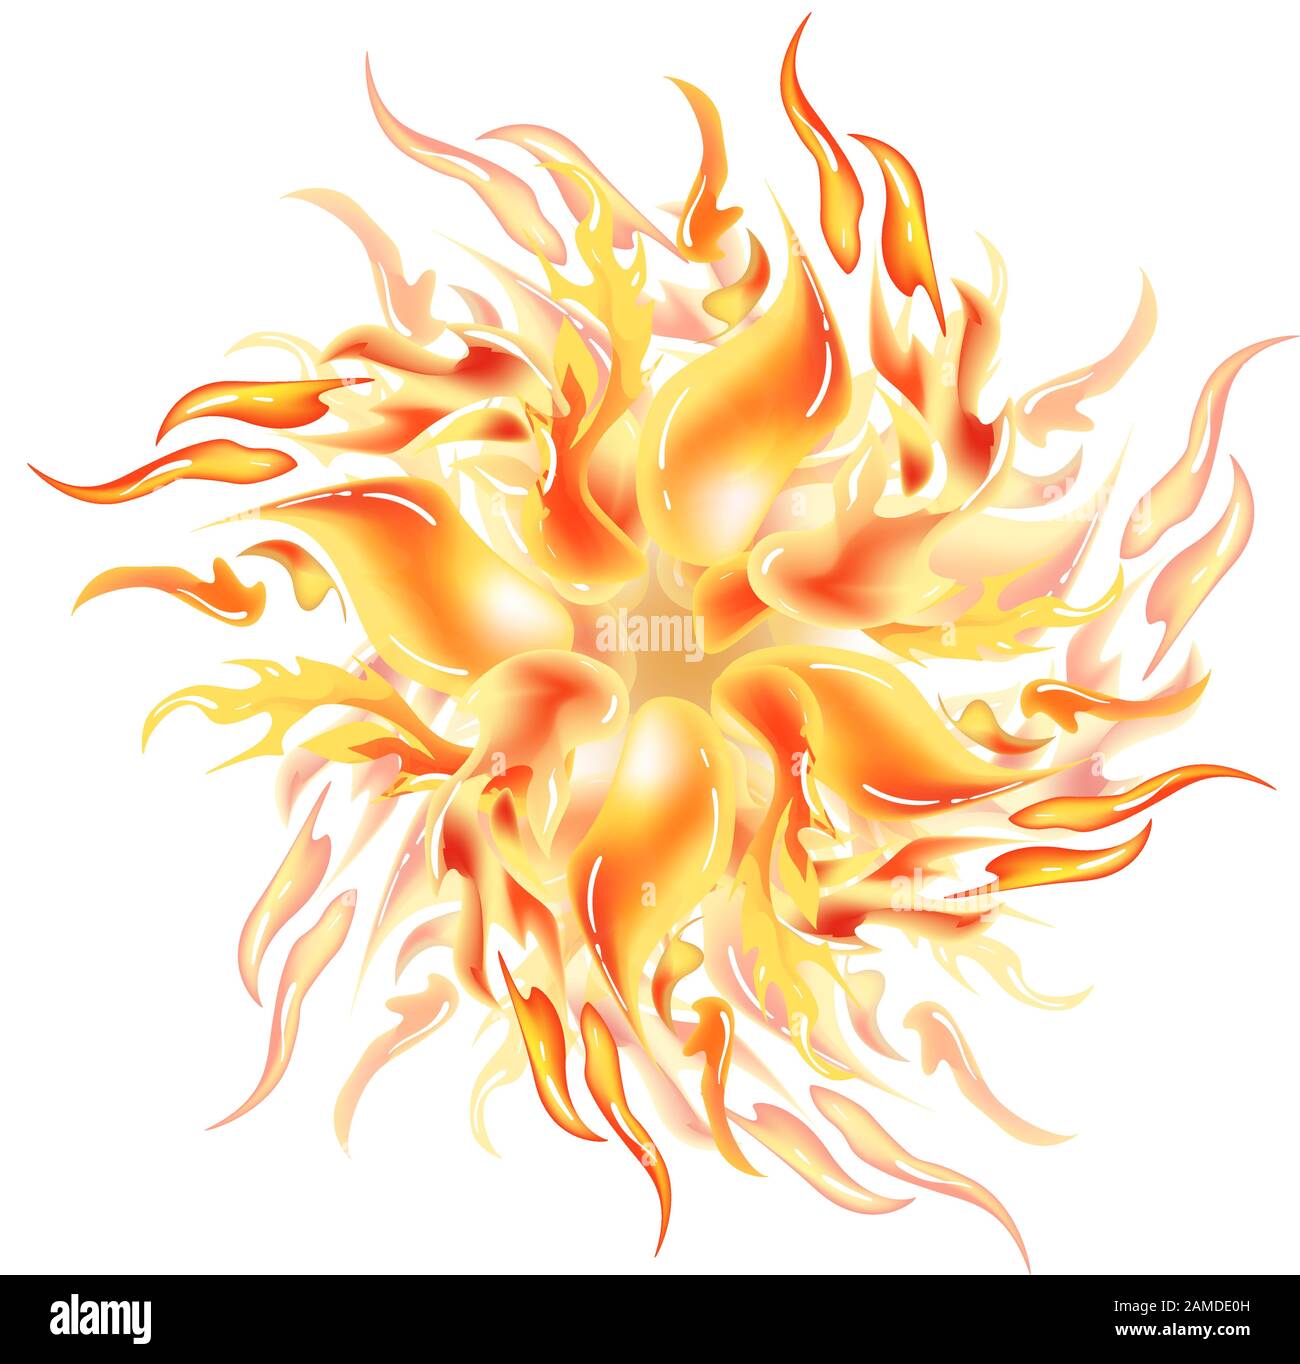 Fire flames vector illustration isolated. Stock Vector